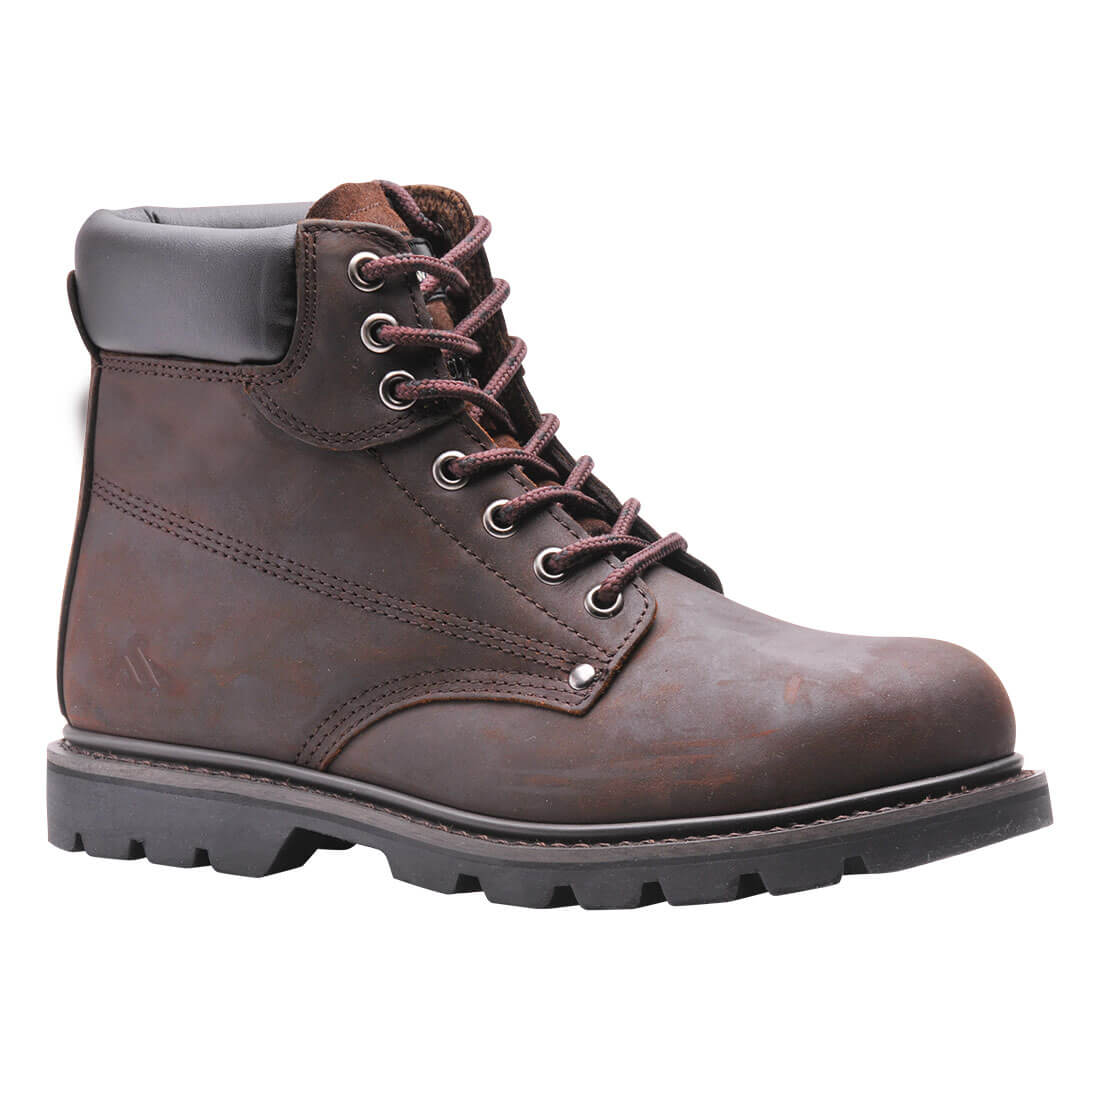 Steelite Welted Safety Boot SB HRO Boots FW17